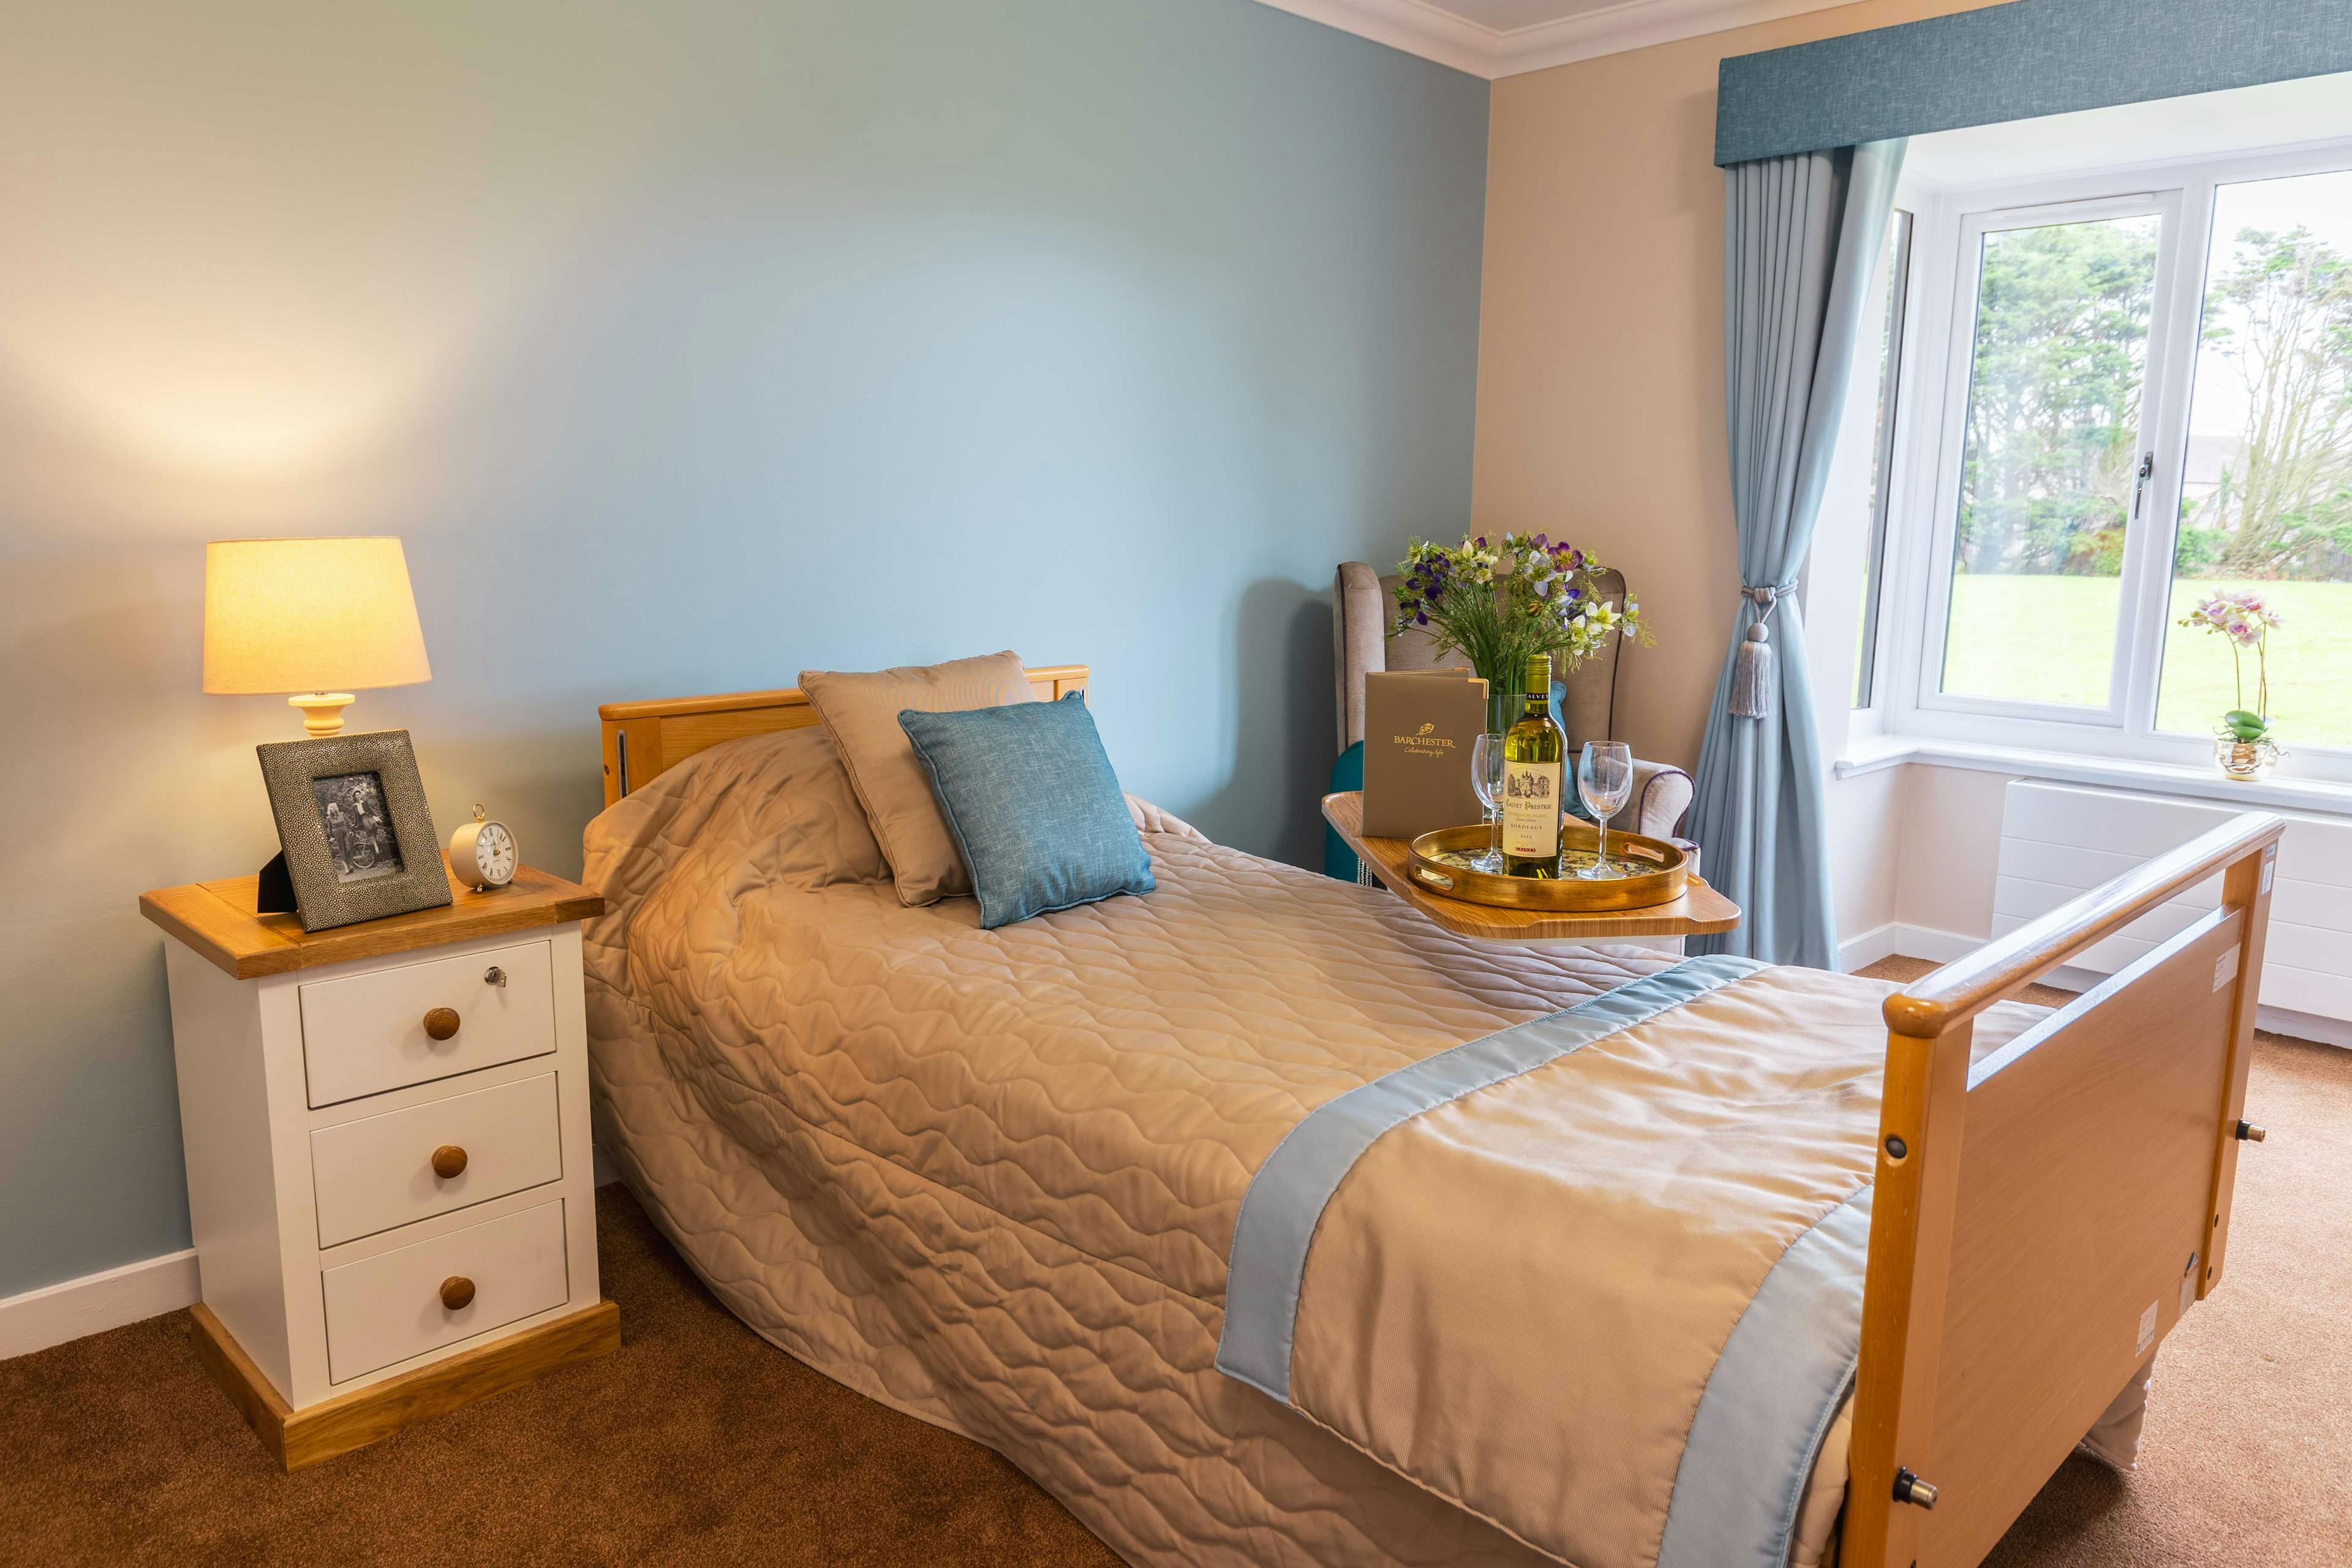 Bedroom at Kirkburn Court Care Home in Peterhead, Aberdeenshire